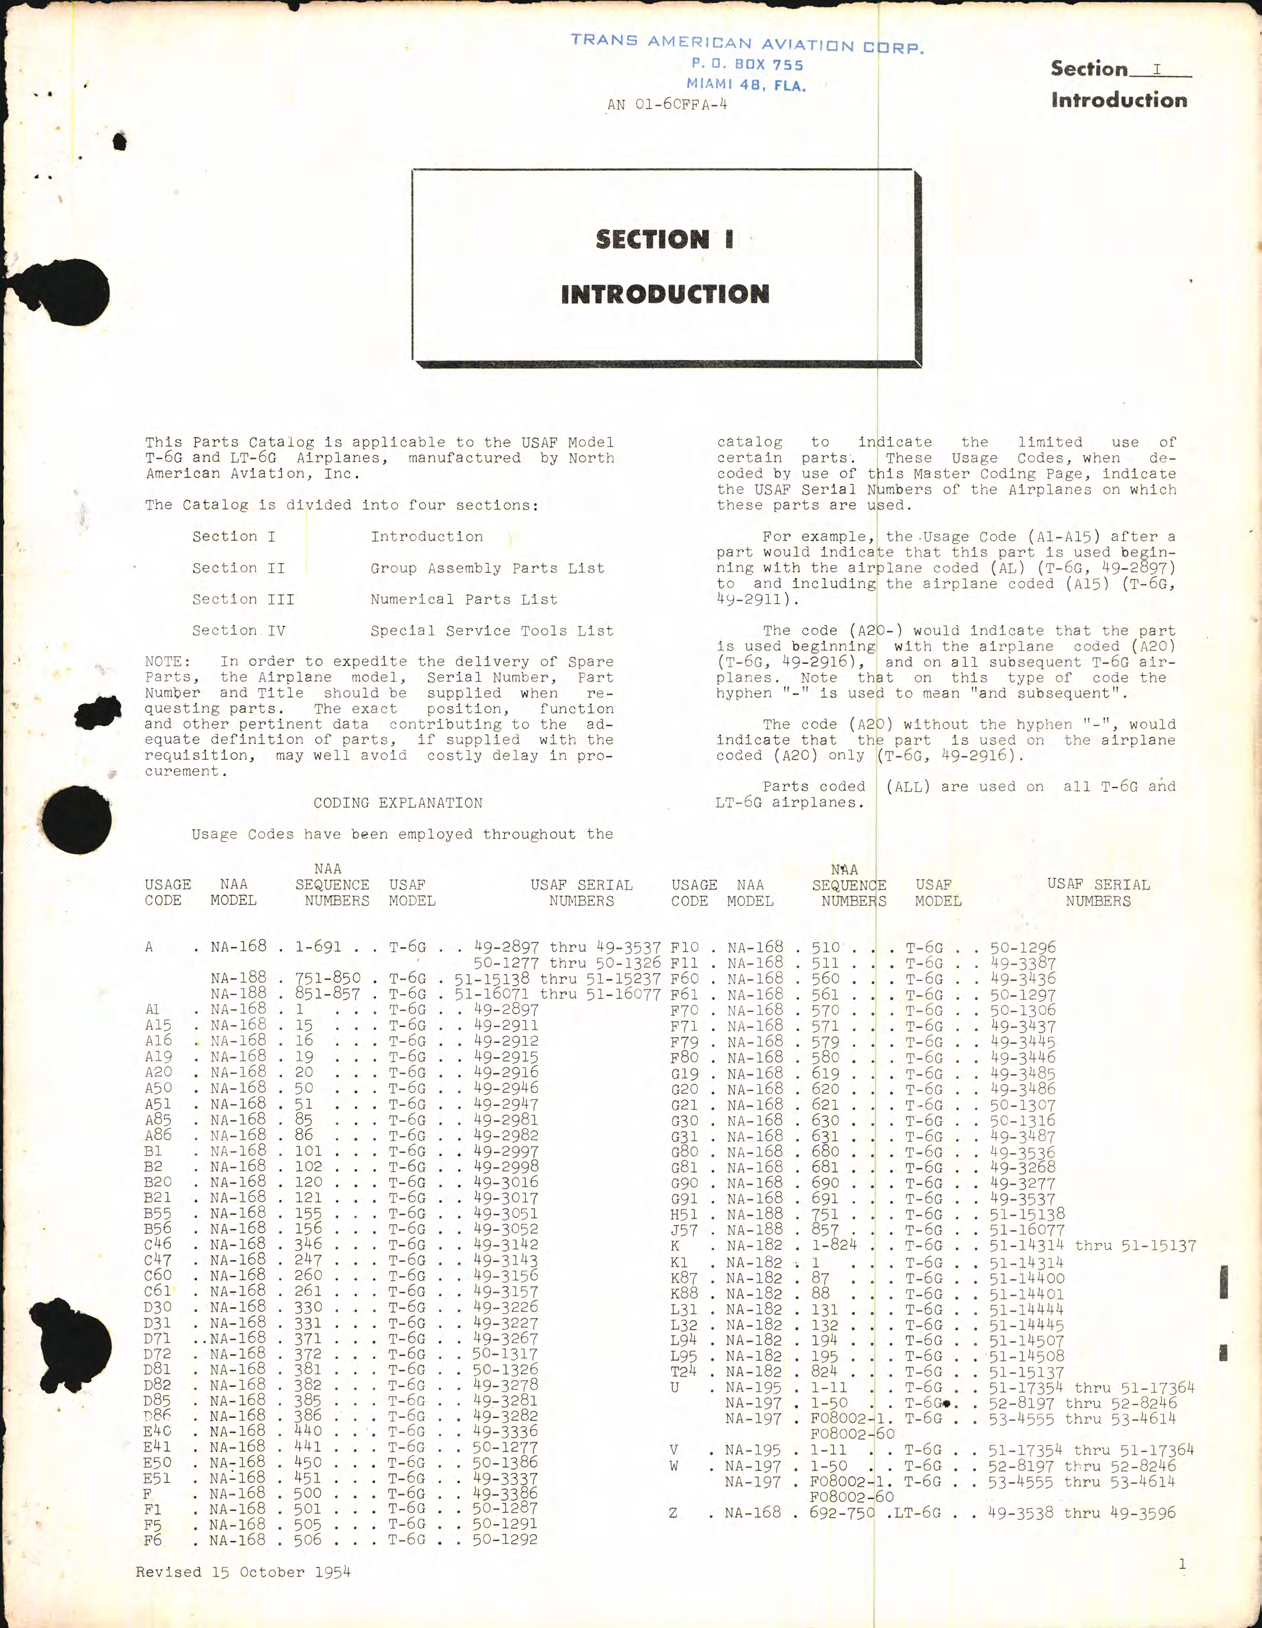 Sample page 5 from AirCorps Library document: Parts Catalog for T-6G and LT-6G